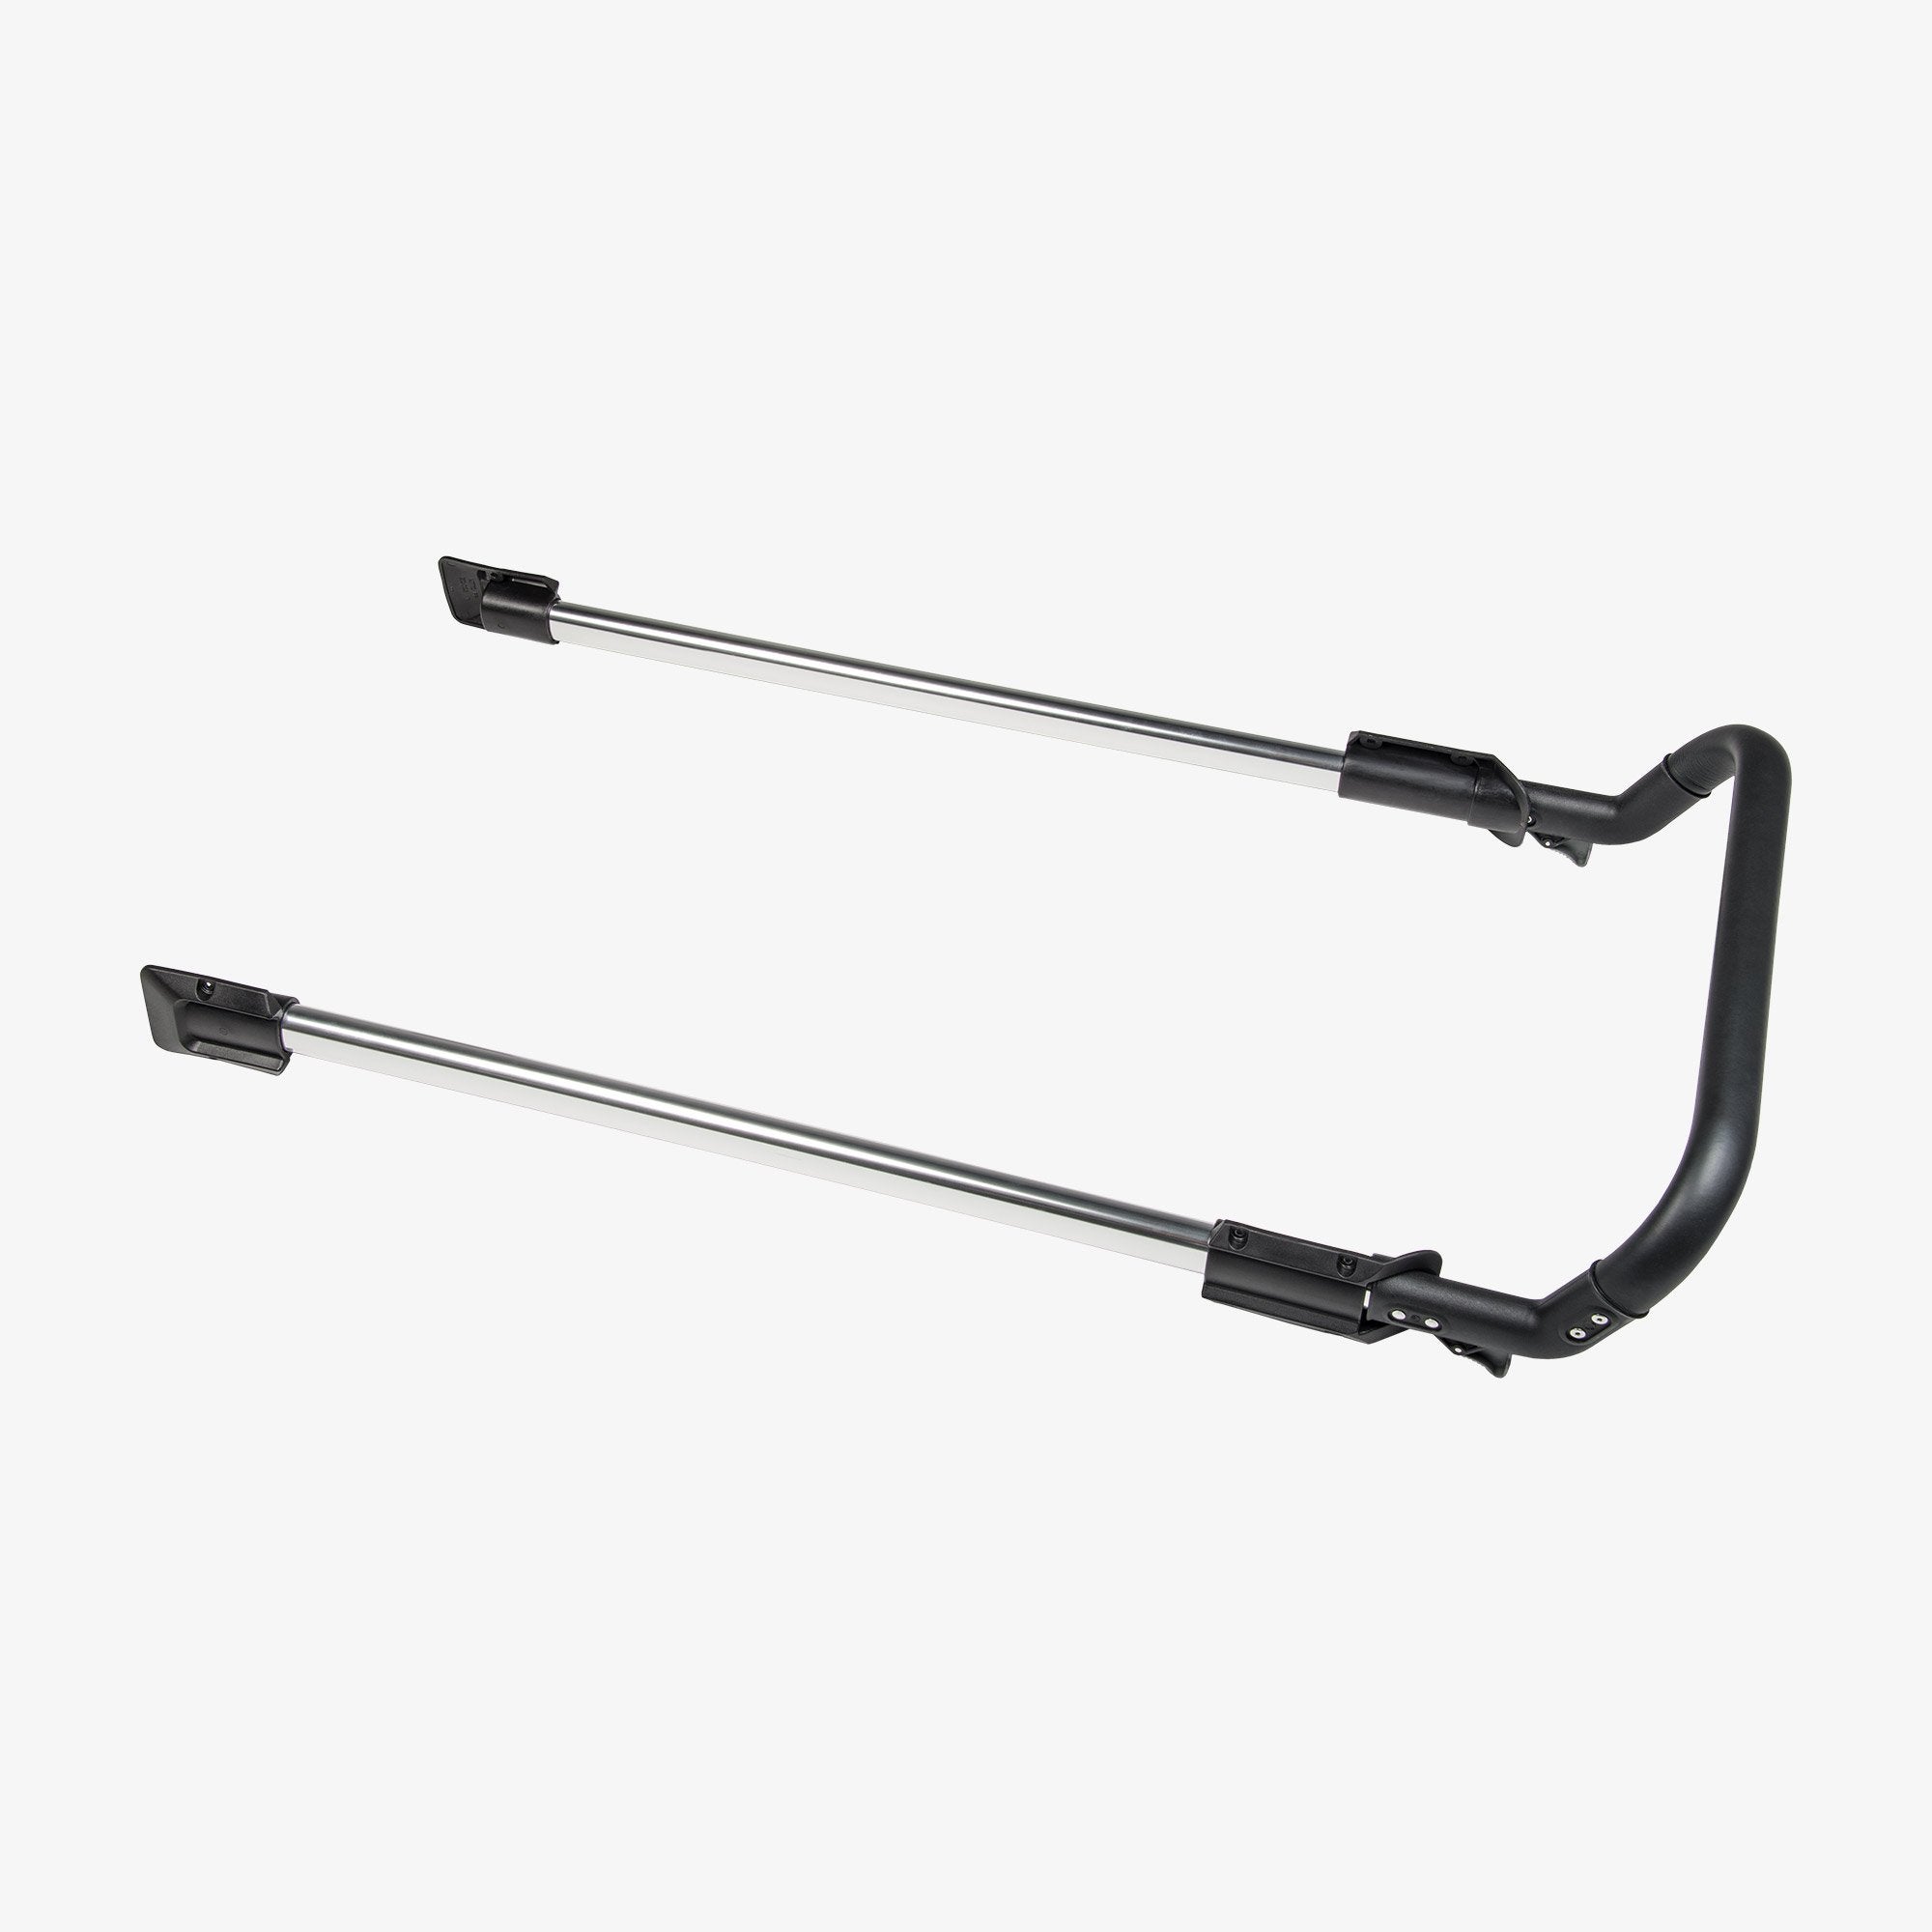 Telescoping Handle For Glide Coolers